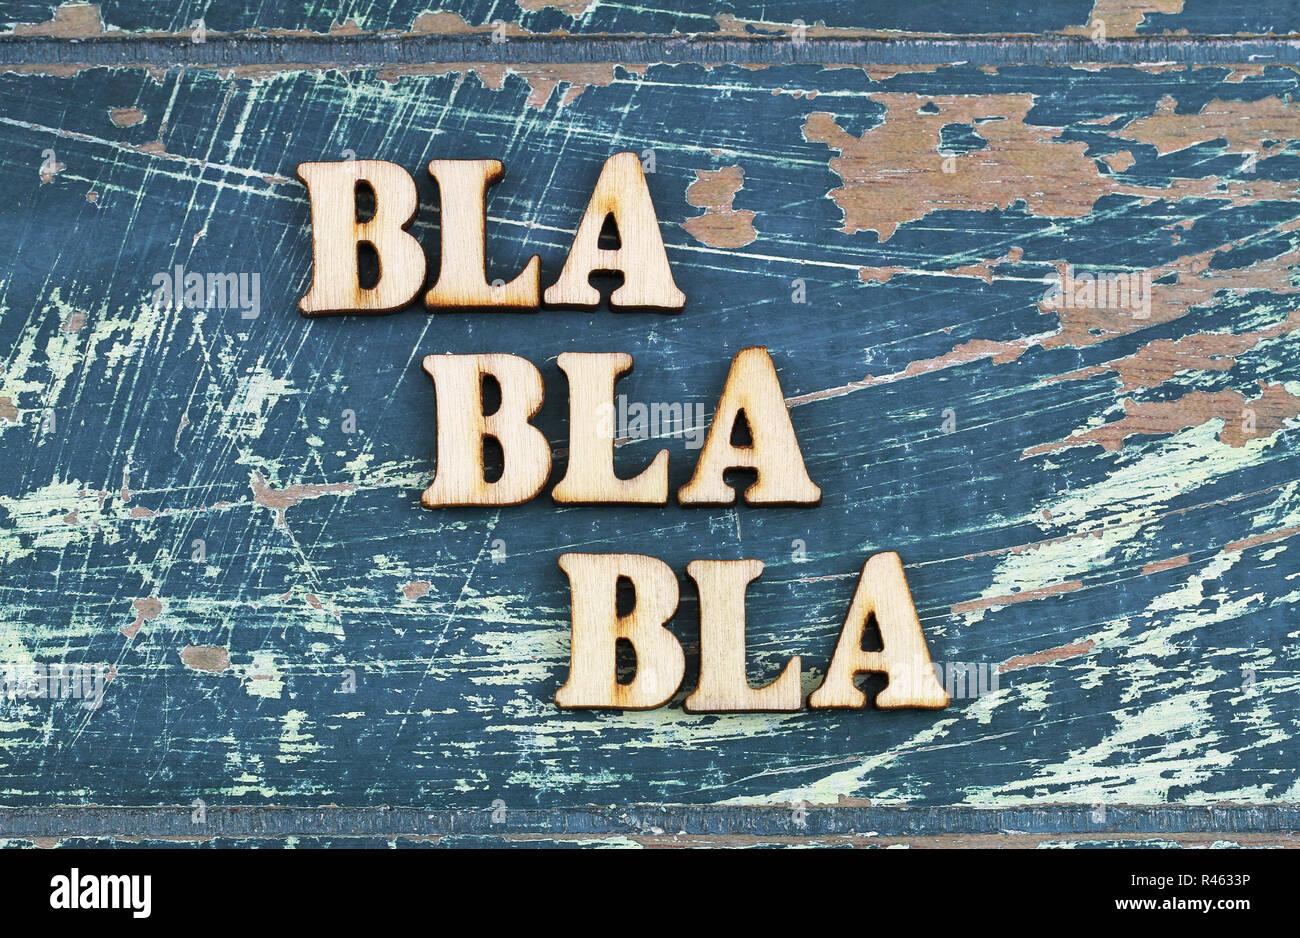 Bla, bla, bla written with wooden letters on rustic surface Stock Photo